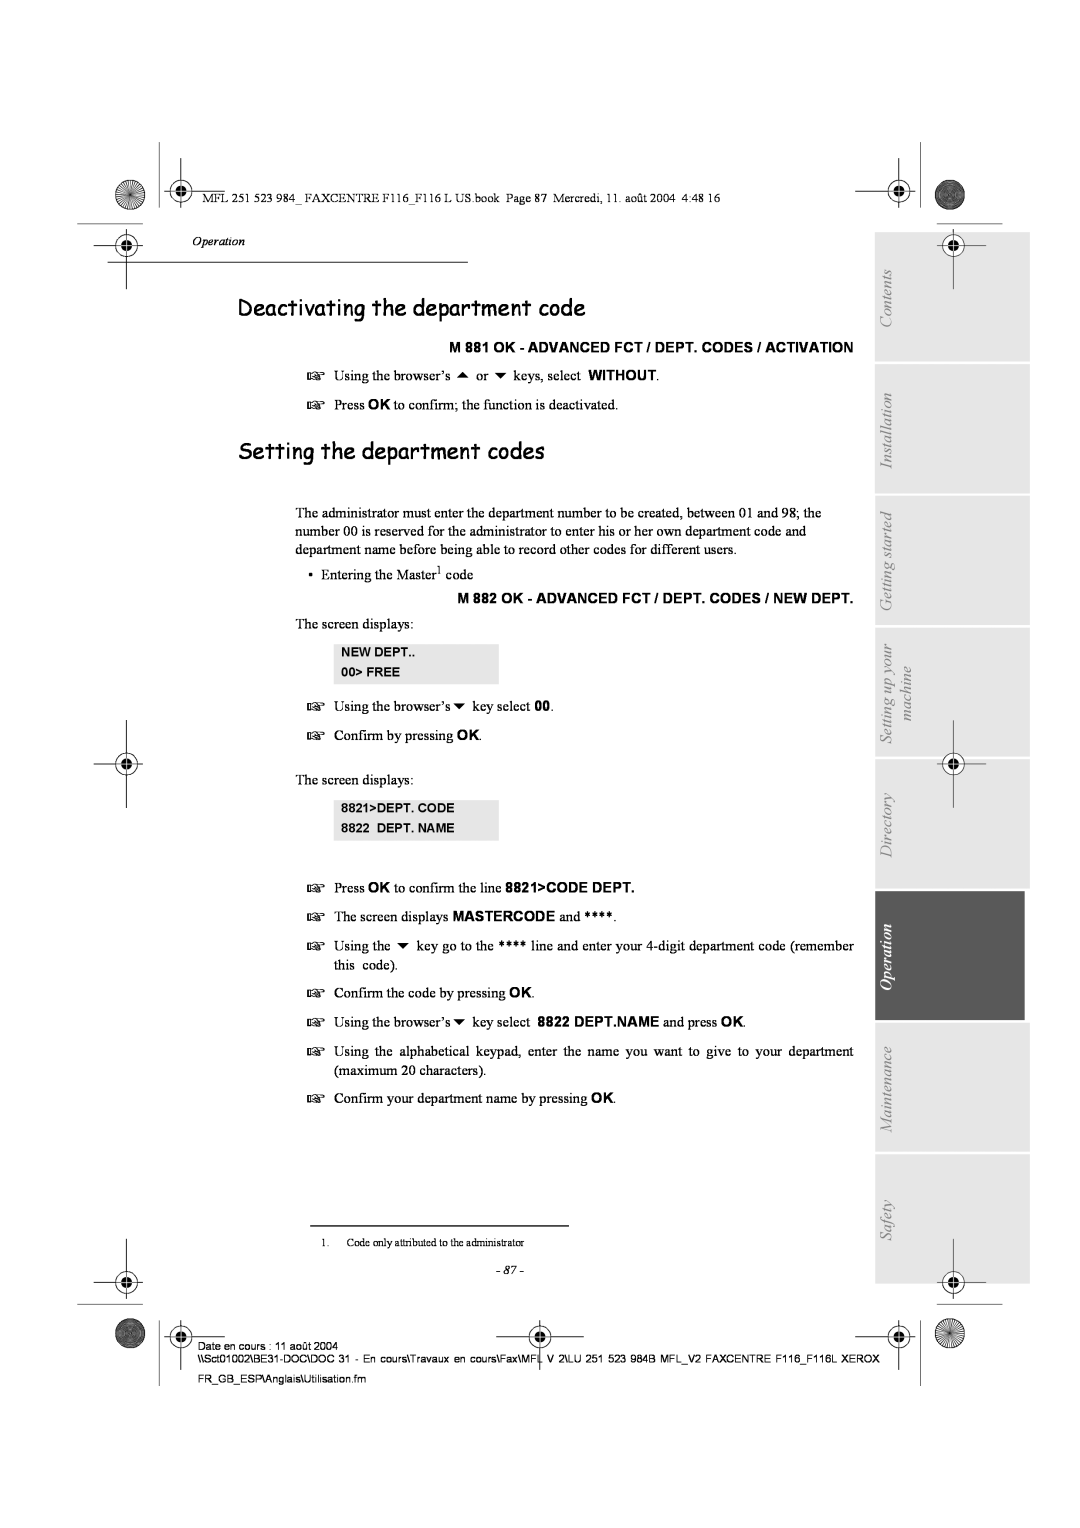 Xerox F116 user manual Deactivating the department code, Setting the department codes 